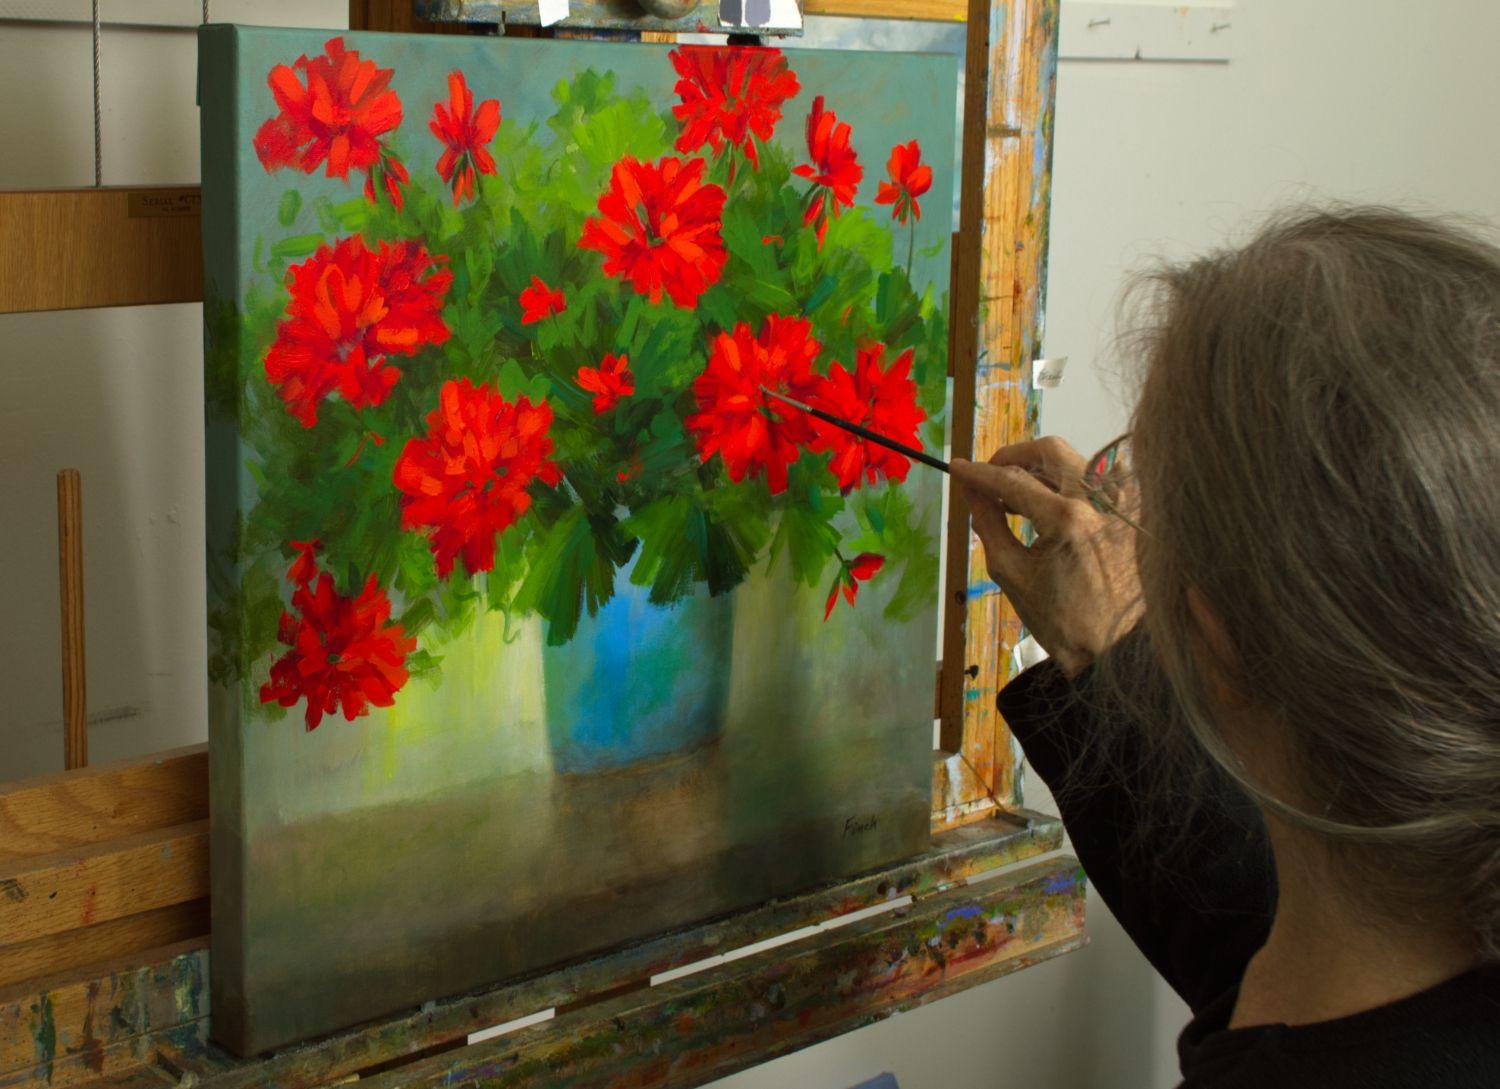 Red Geraniums! Always a favorite floral subject for their cheerful reds welcoming in Springtime. This painting is created on gallery wrap canvas with the painting continuing on the sides. It is 1.5